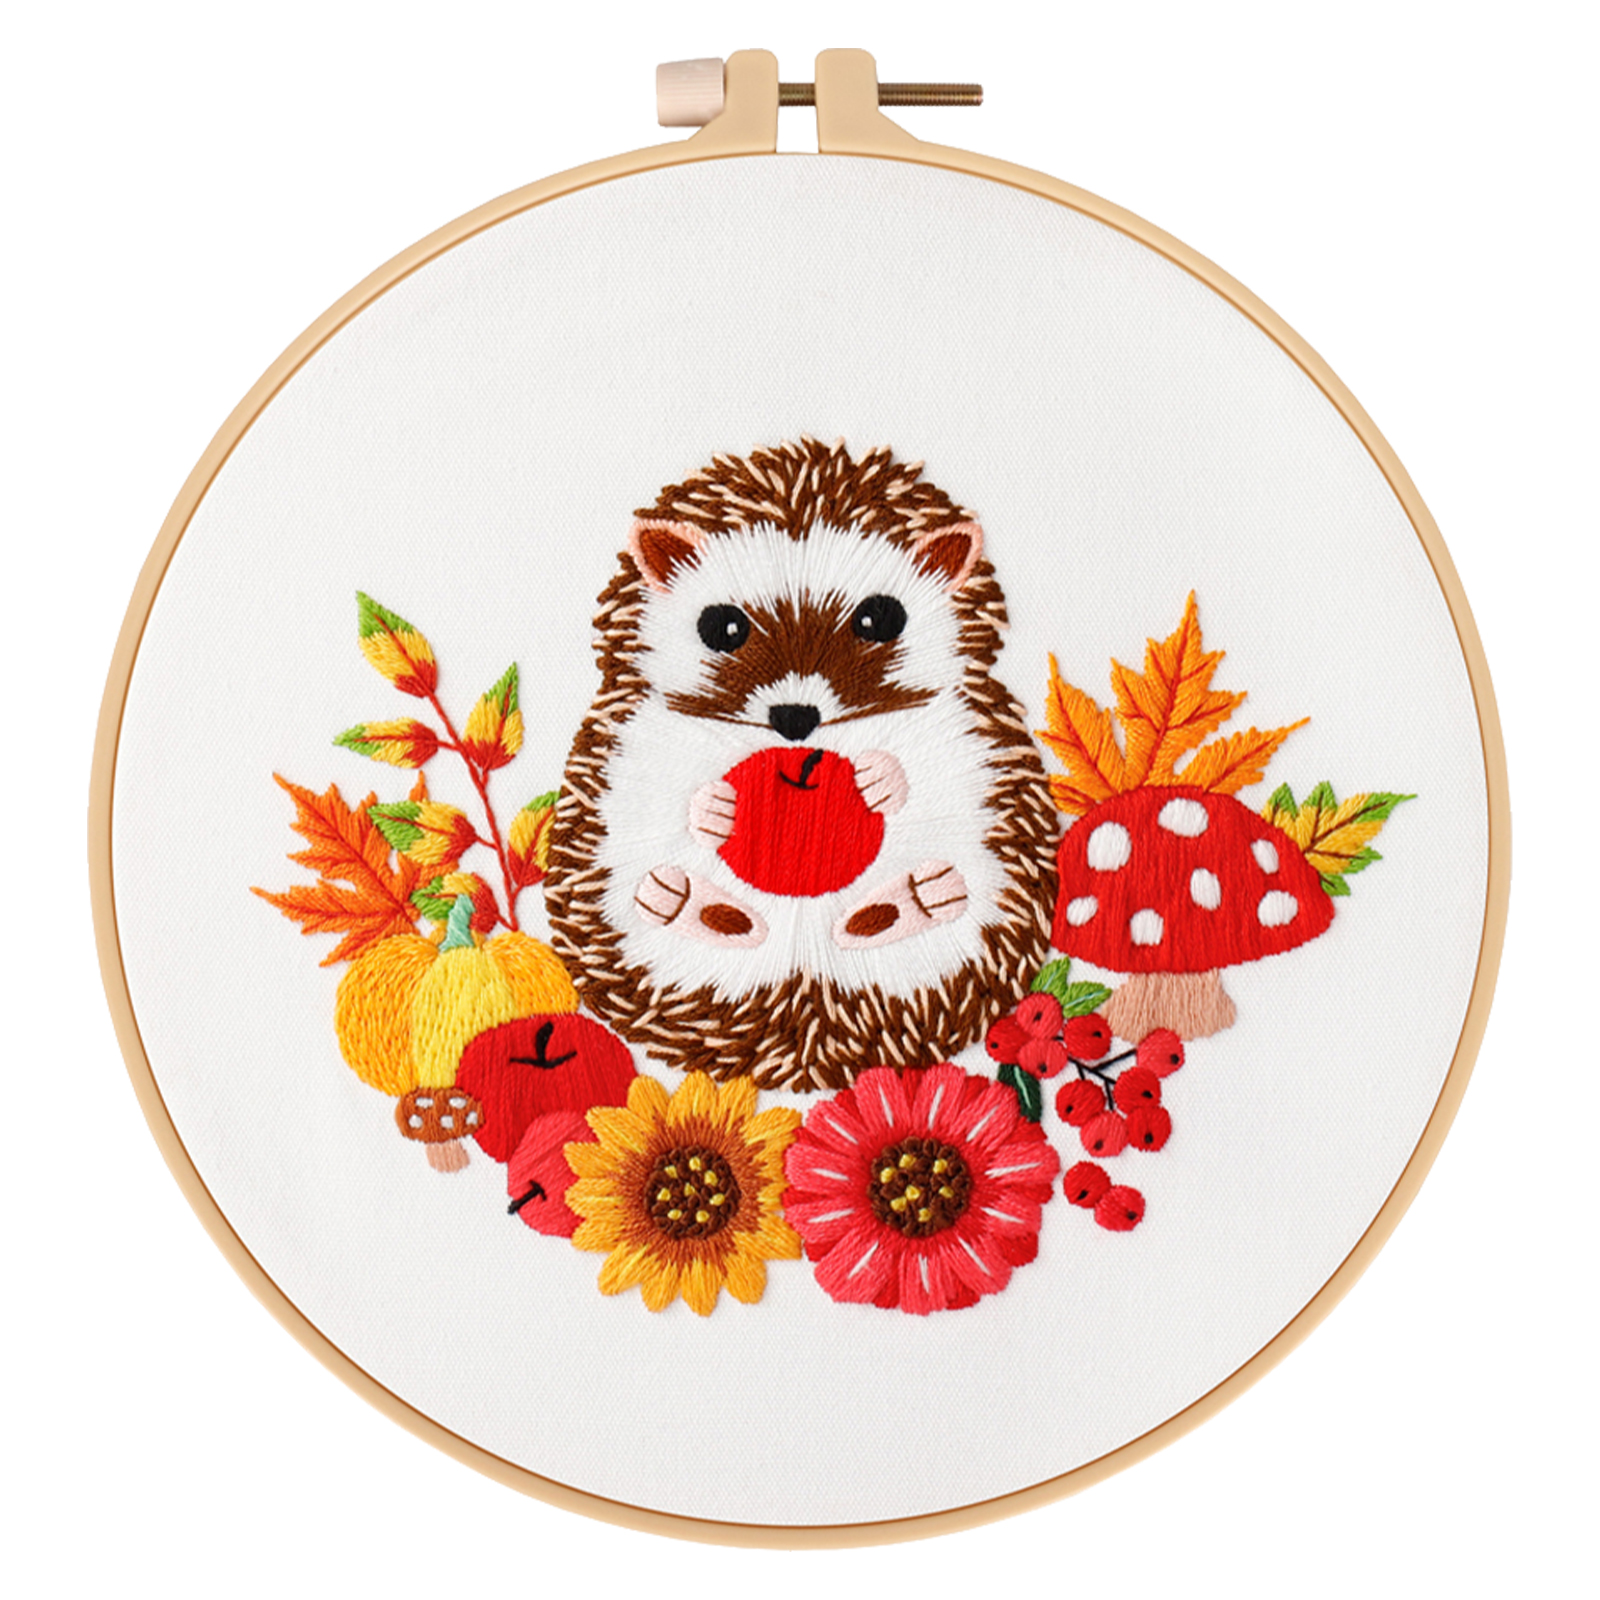 Embroidery Starter Kit Cross stitch kit for  Adult Beginners  - Cute Hedgehog Pattern 